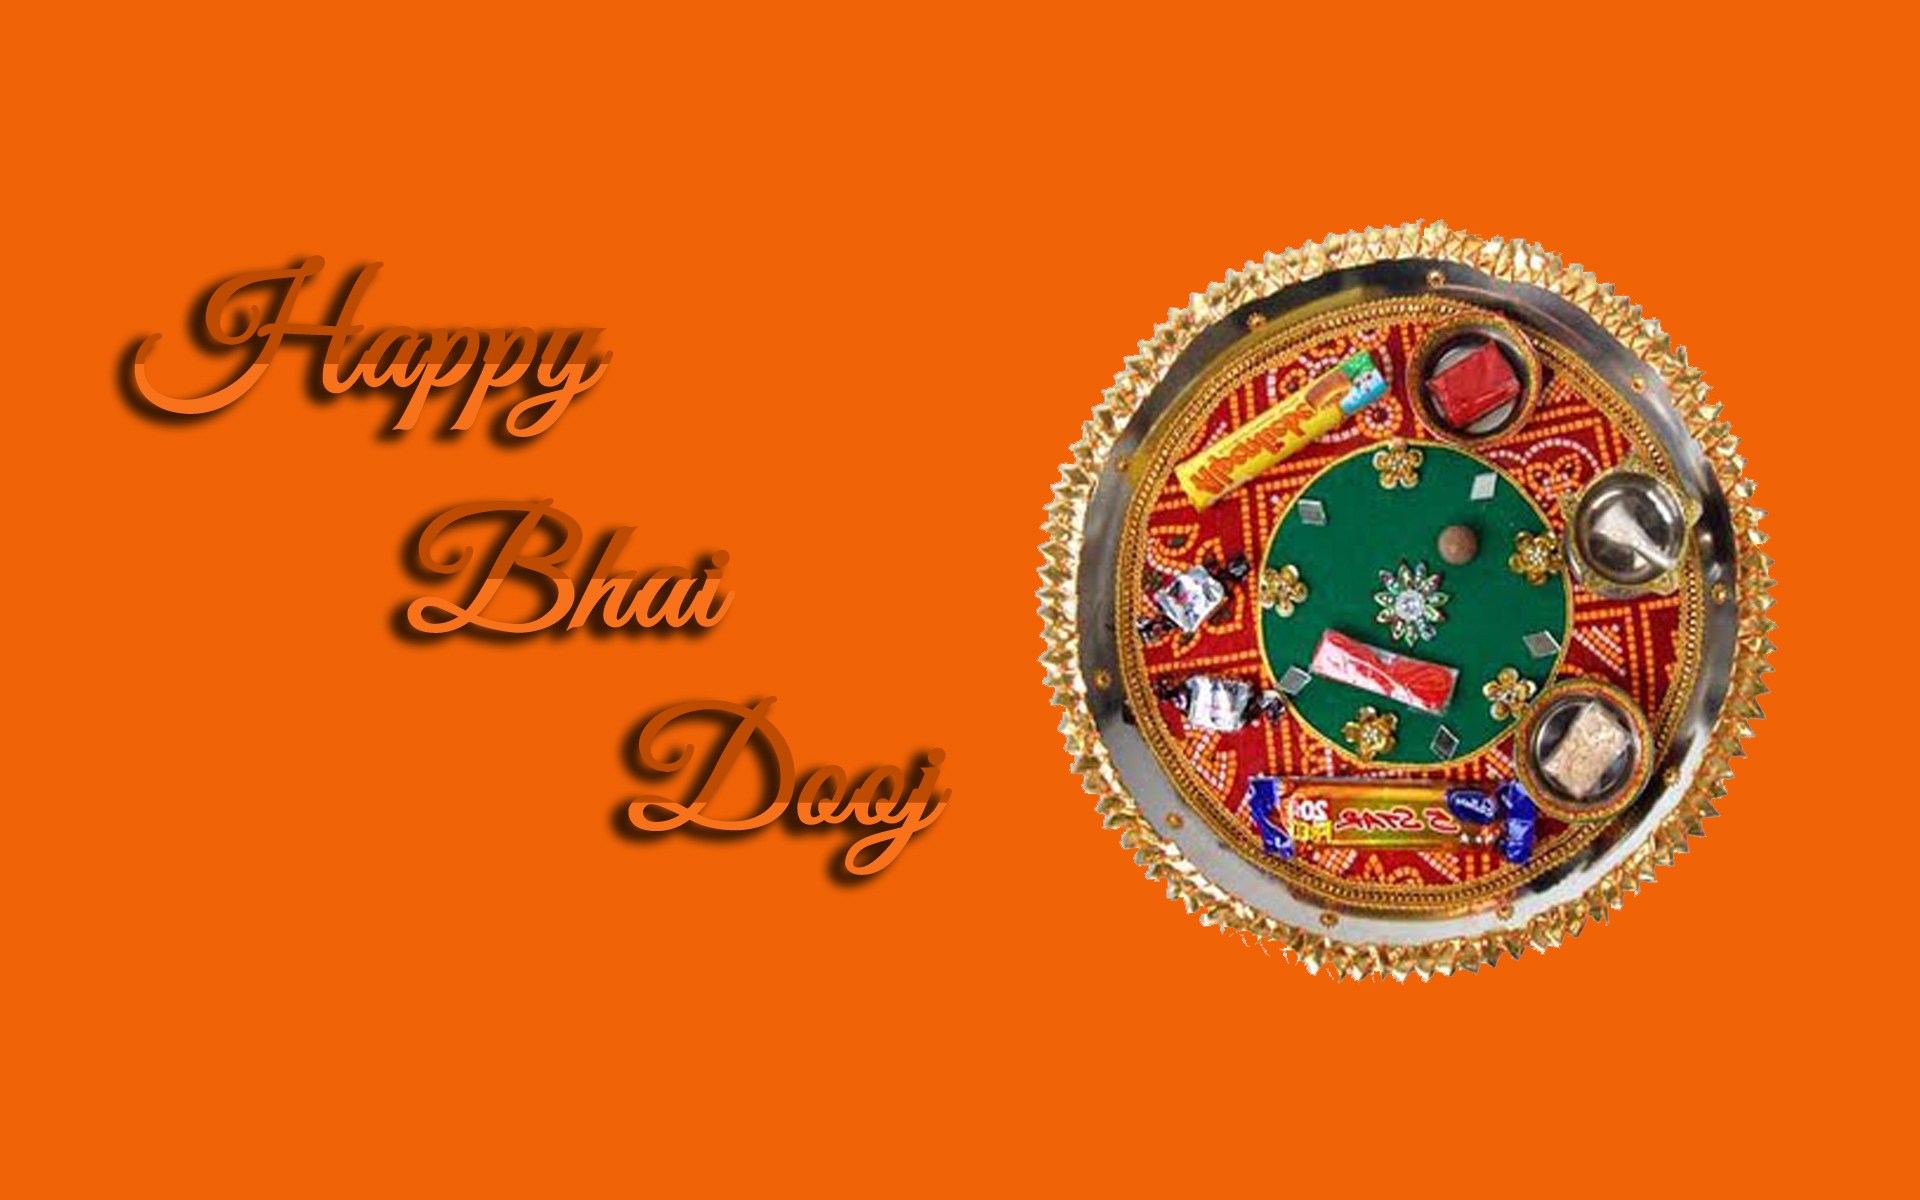 50+ Most Beautiful Bhai Dooj Wish Pictures And Images